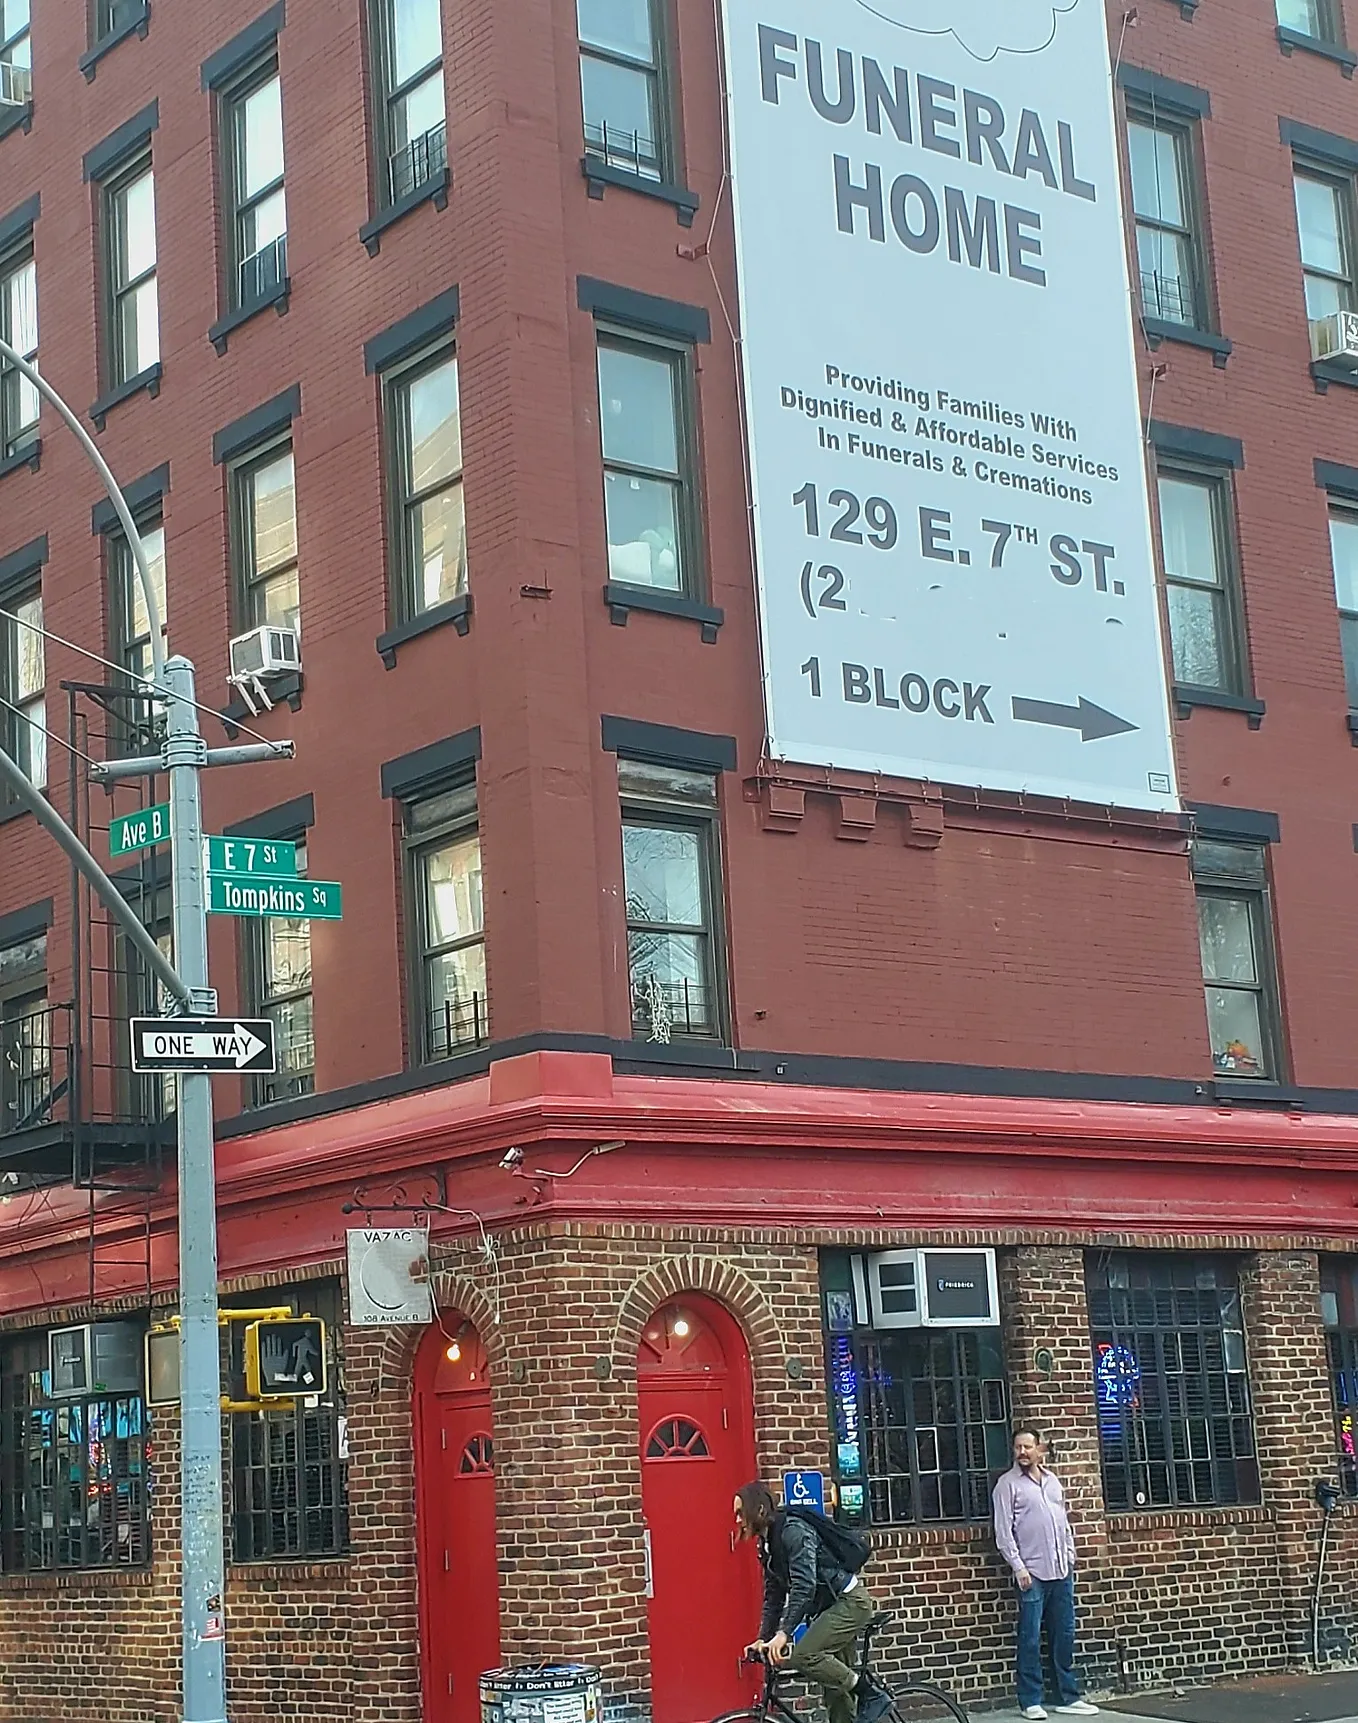 A corner bar in NYC is situated underneath an ad for a funeral home, one block away